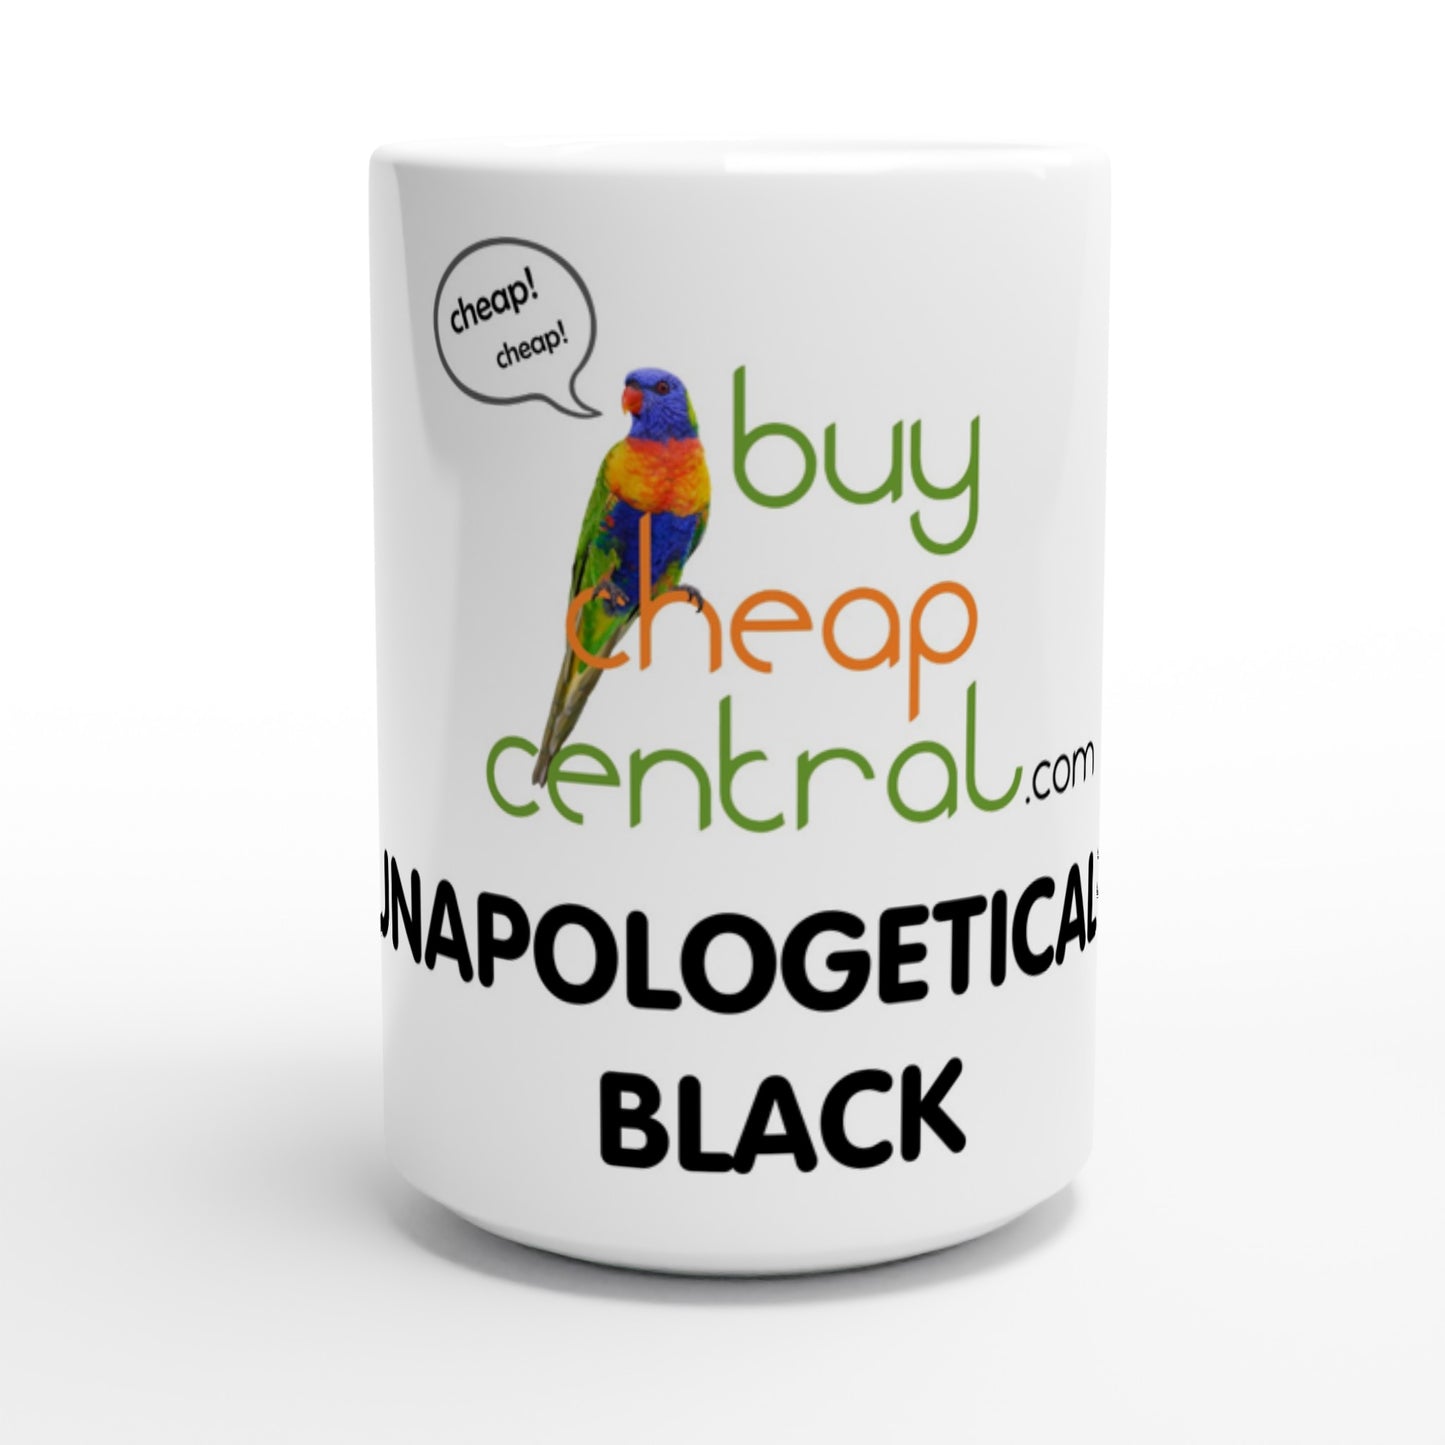 Unapologetically BLACK - Mugs & Water Bottles